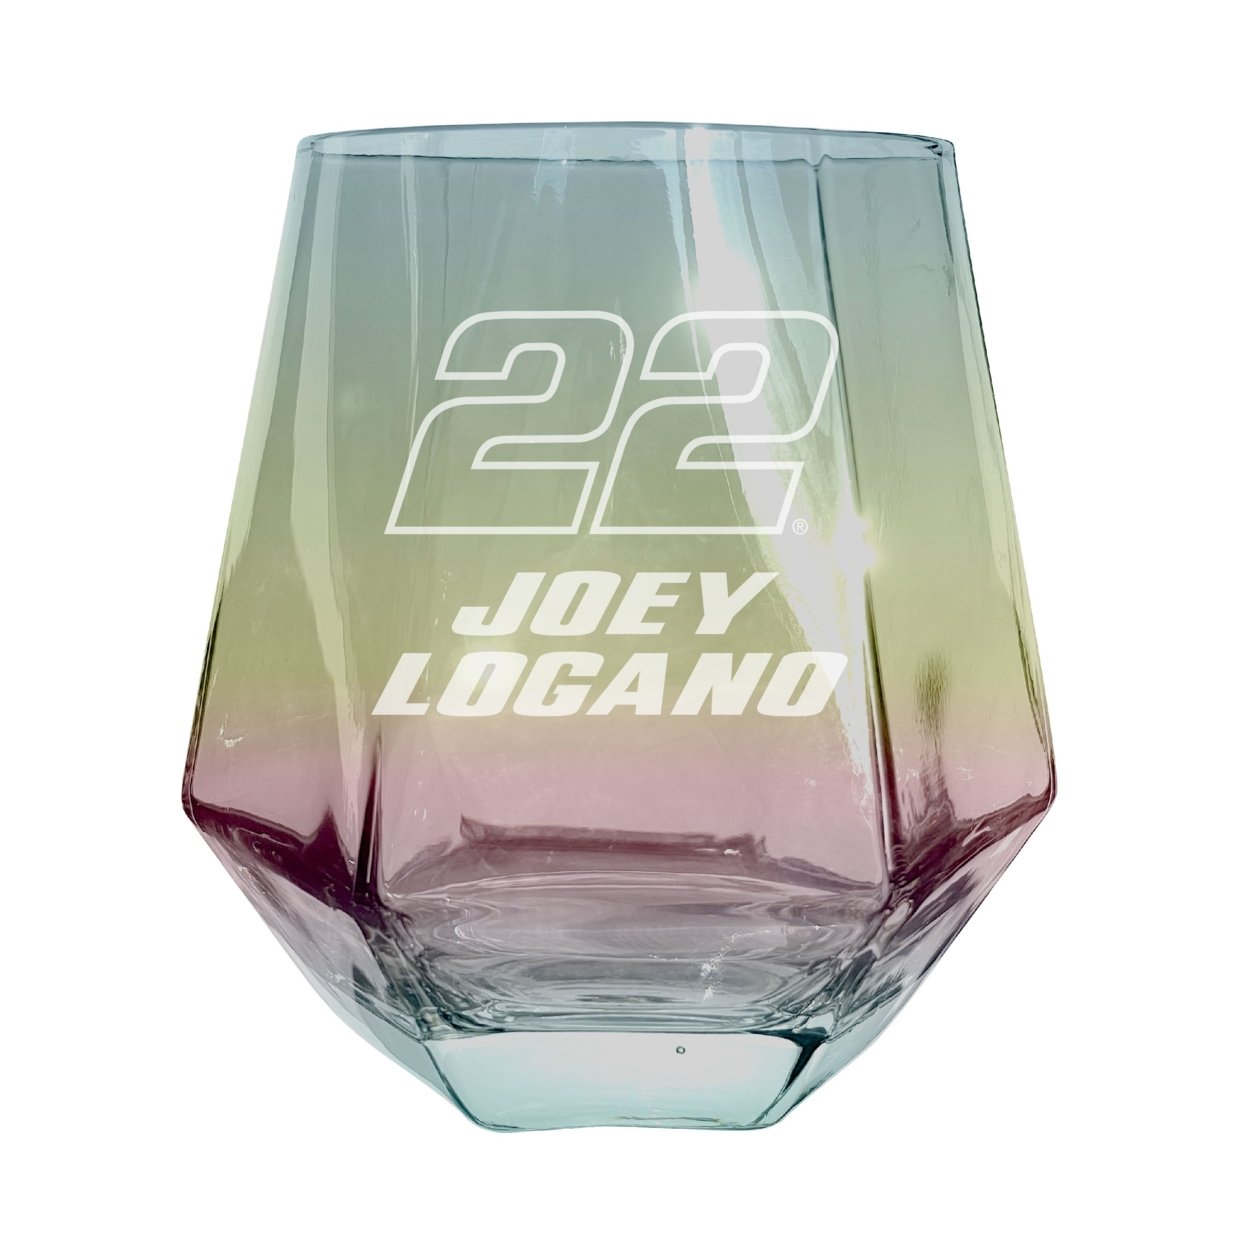 #22 Joey Logano Officially Licensed 10 Oz Engraved Diamond Wine Glass - Iridescent, 2-Pack